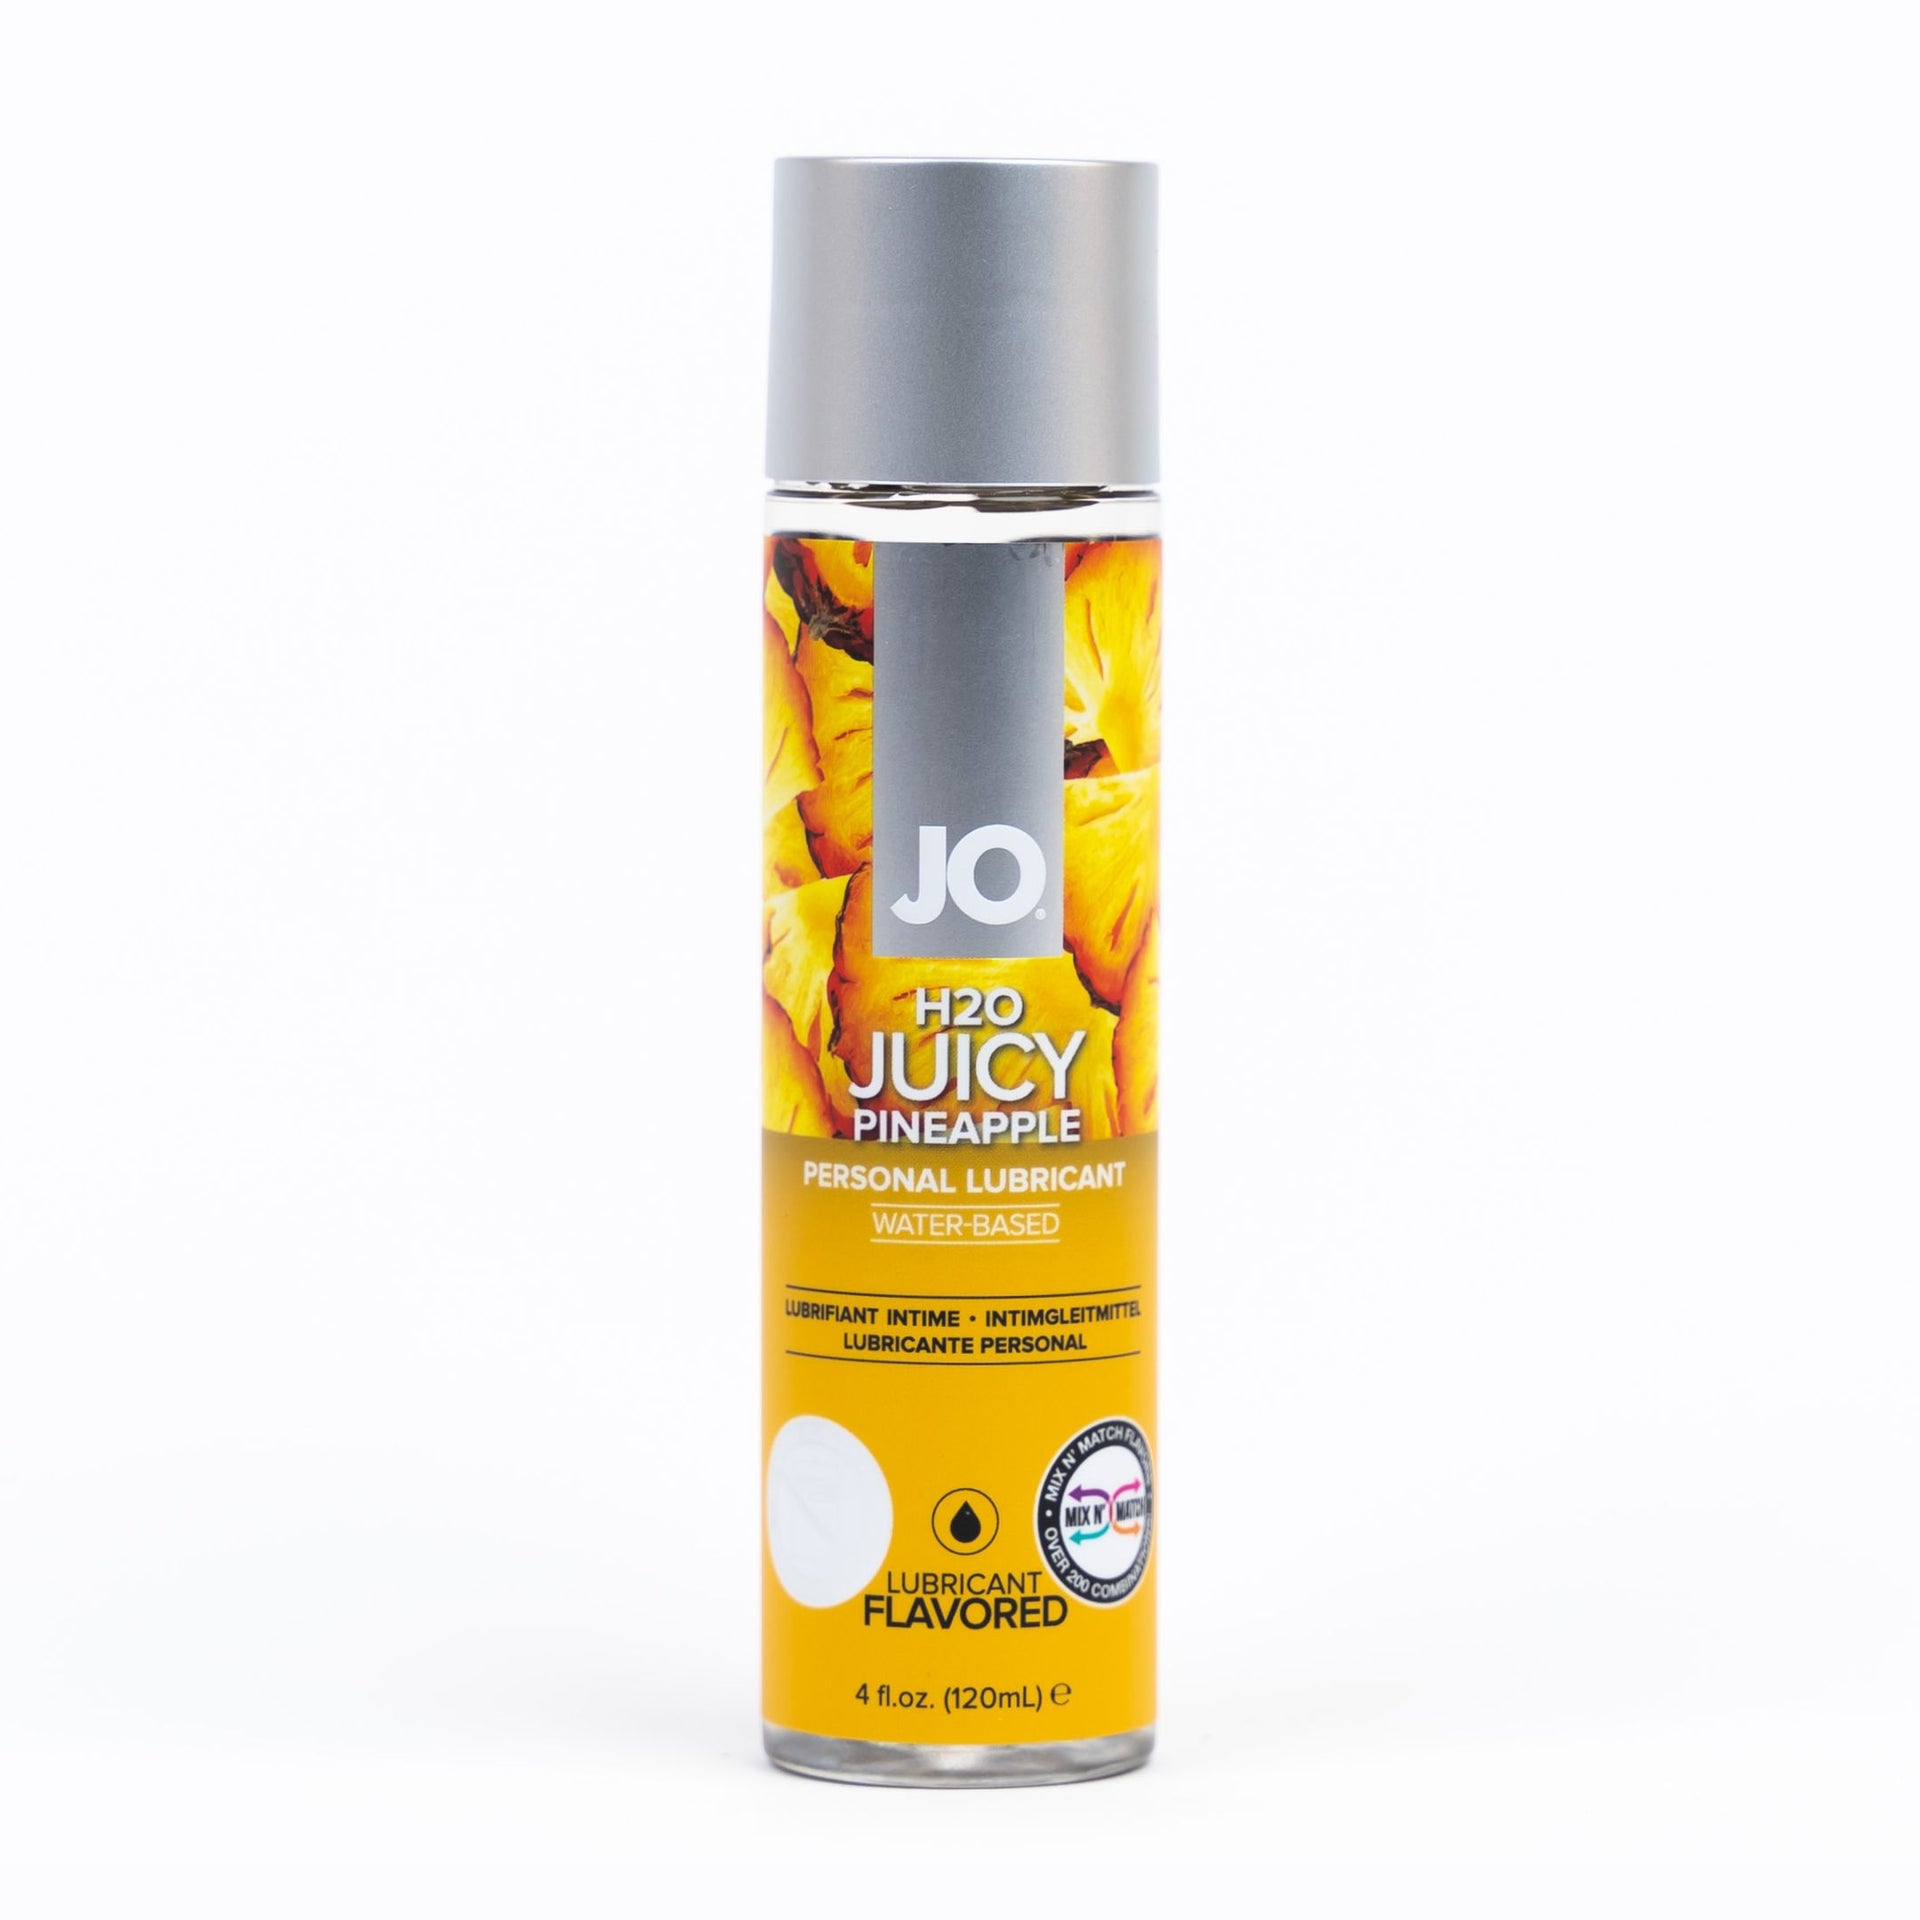 h20 juicy pineapple lubricant front of pack